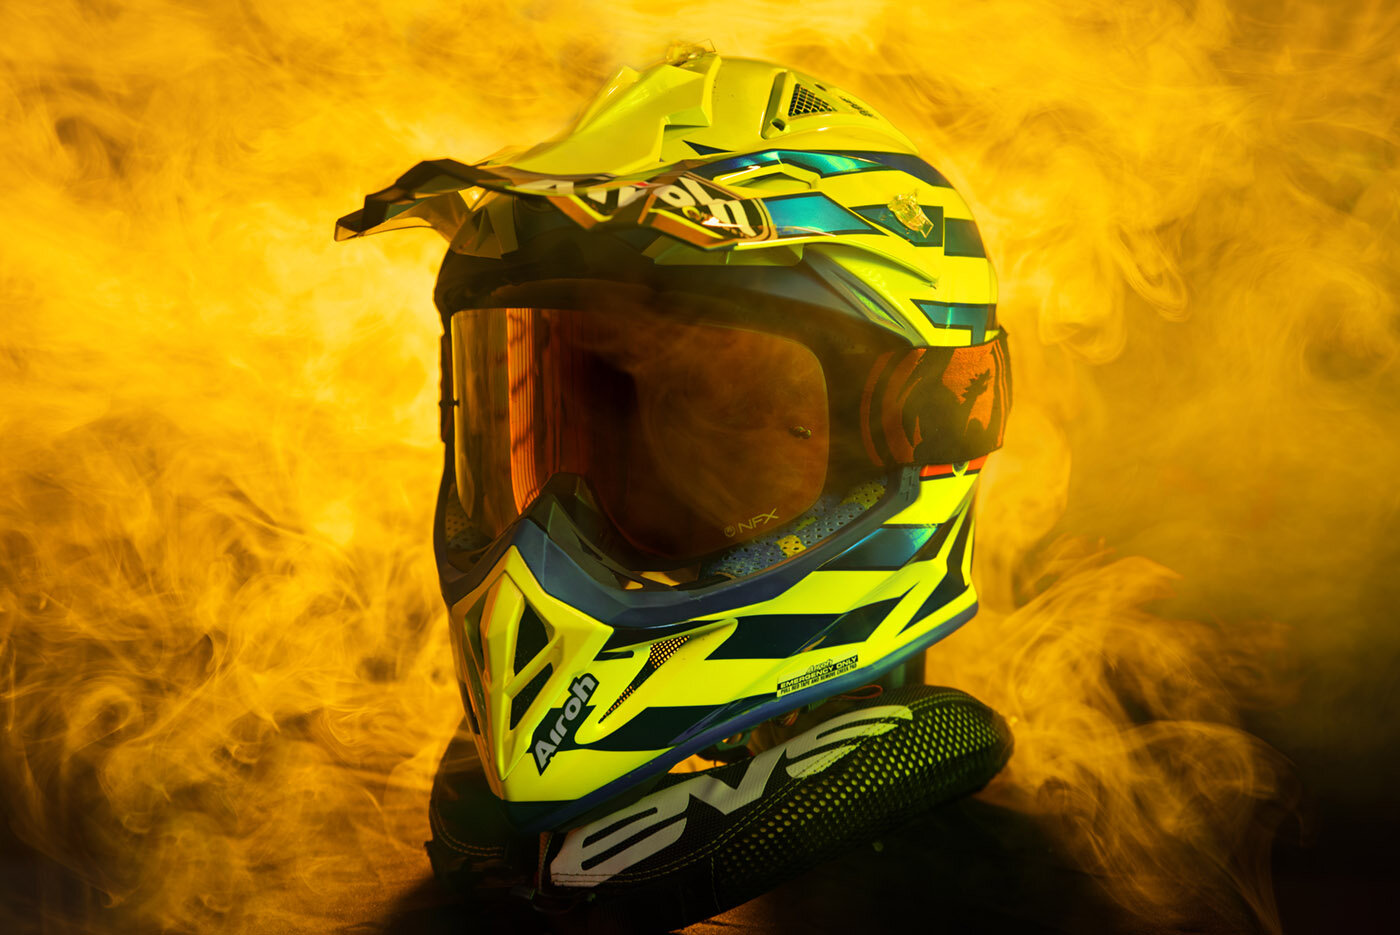 airoh_helmets_product_photography.jpg